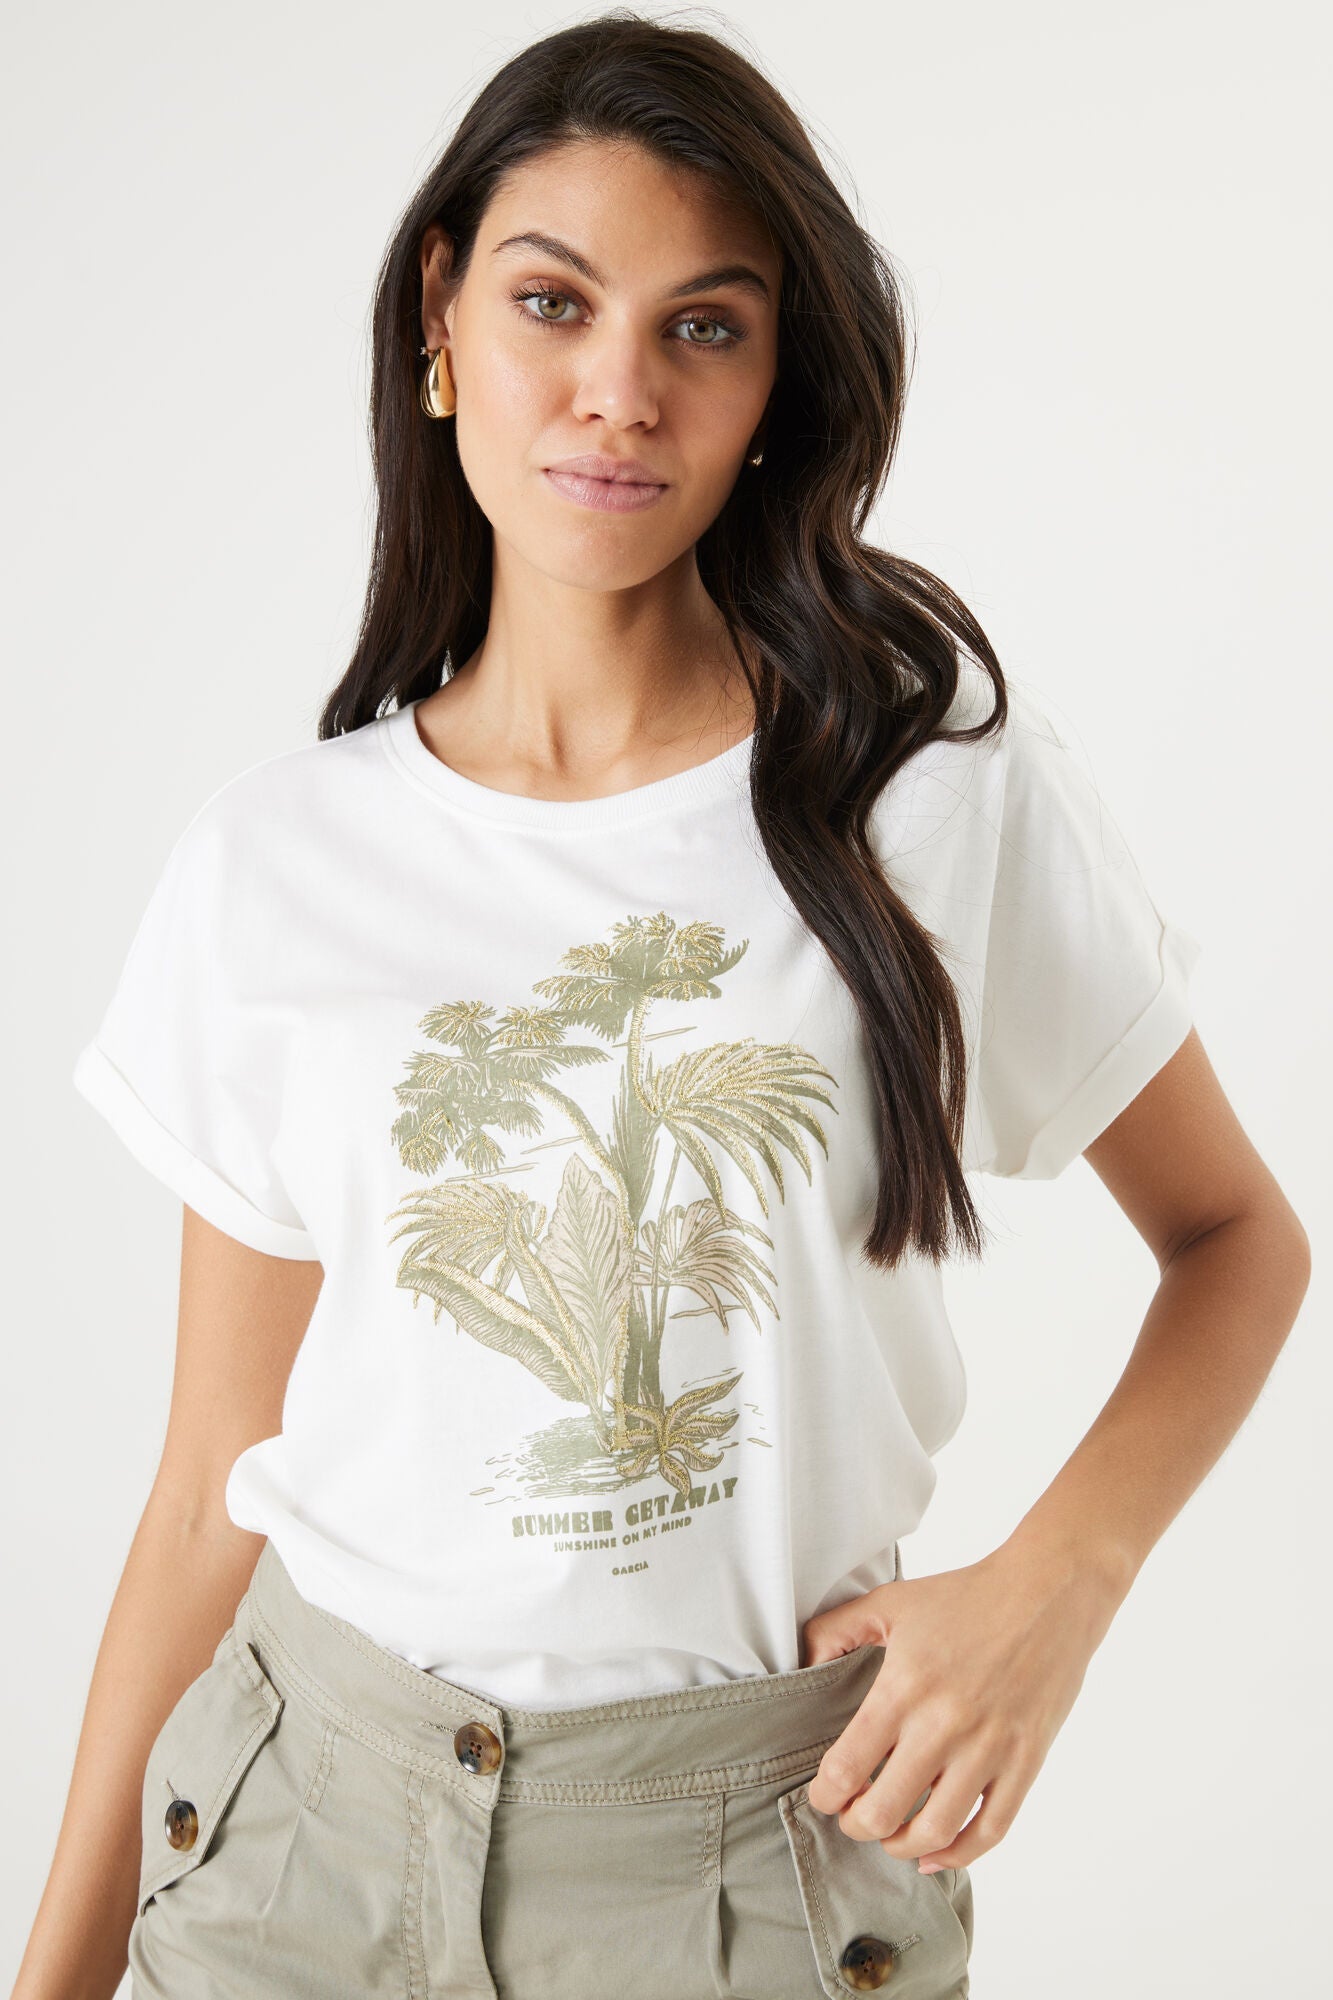 Garcia (Q40015) Women's Short Sleeve Palm Tree Graphic Tee With Golden Embroidery Accents in White